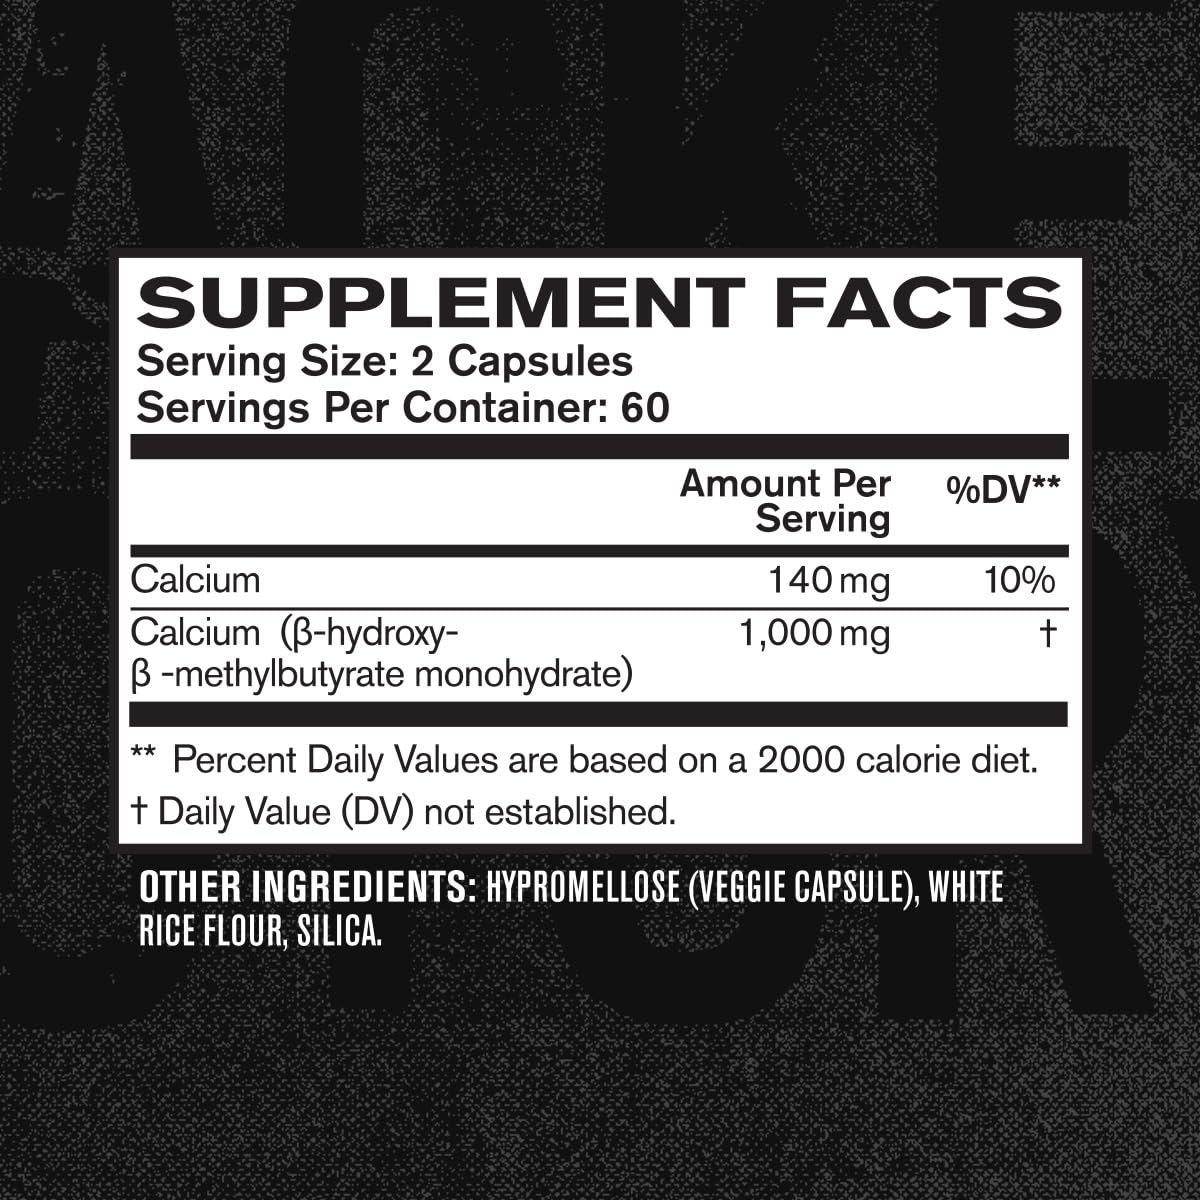 Jacked Factory Muscle Building Supplement Stack | Essentials Muscle Builder - Daily Muscle Builder & Essentials HMB for Lean Muscle Growth